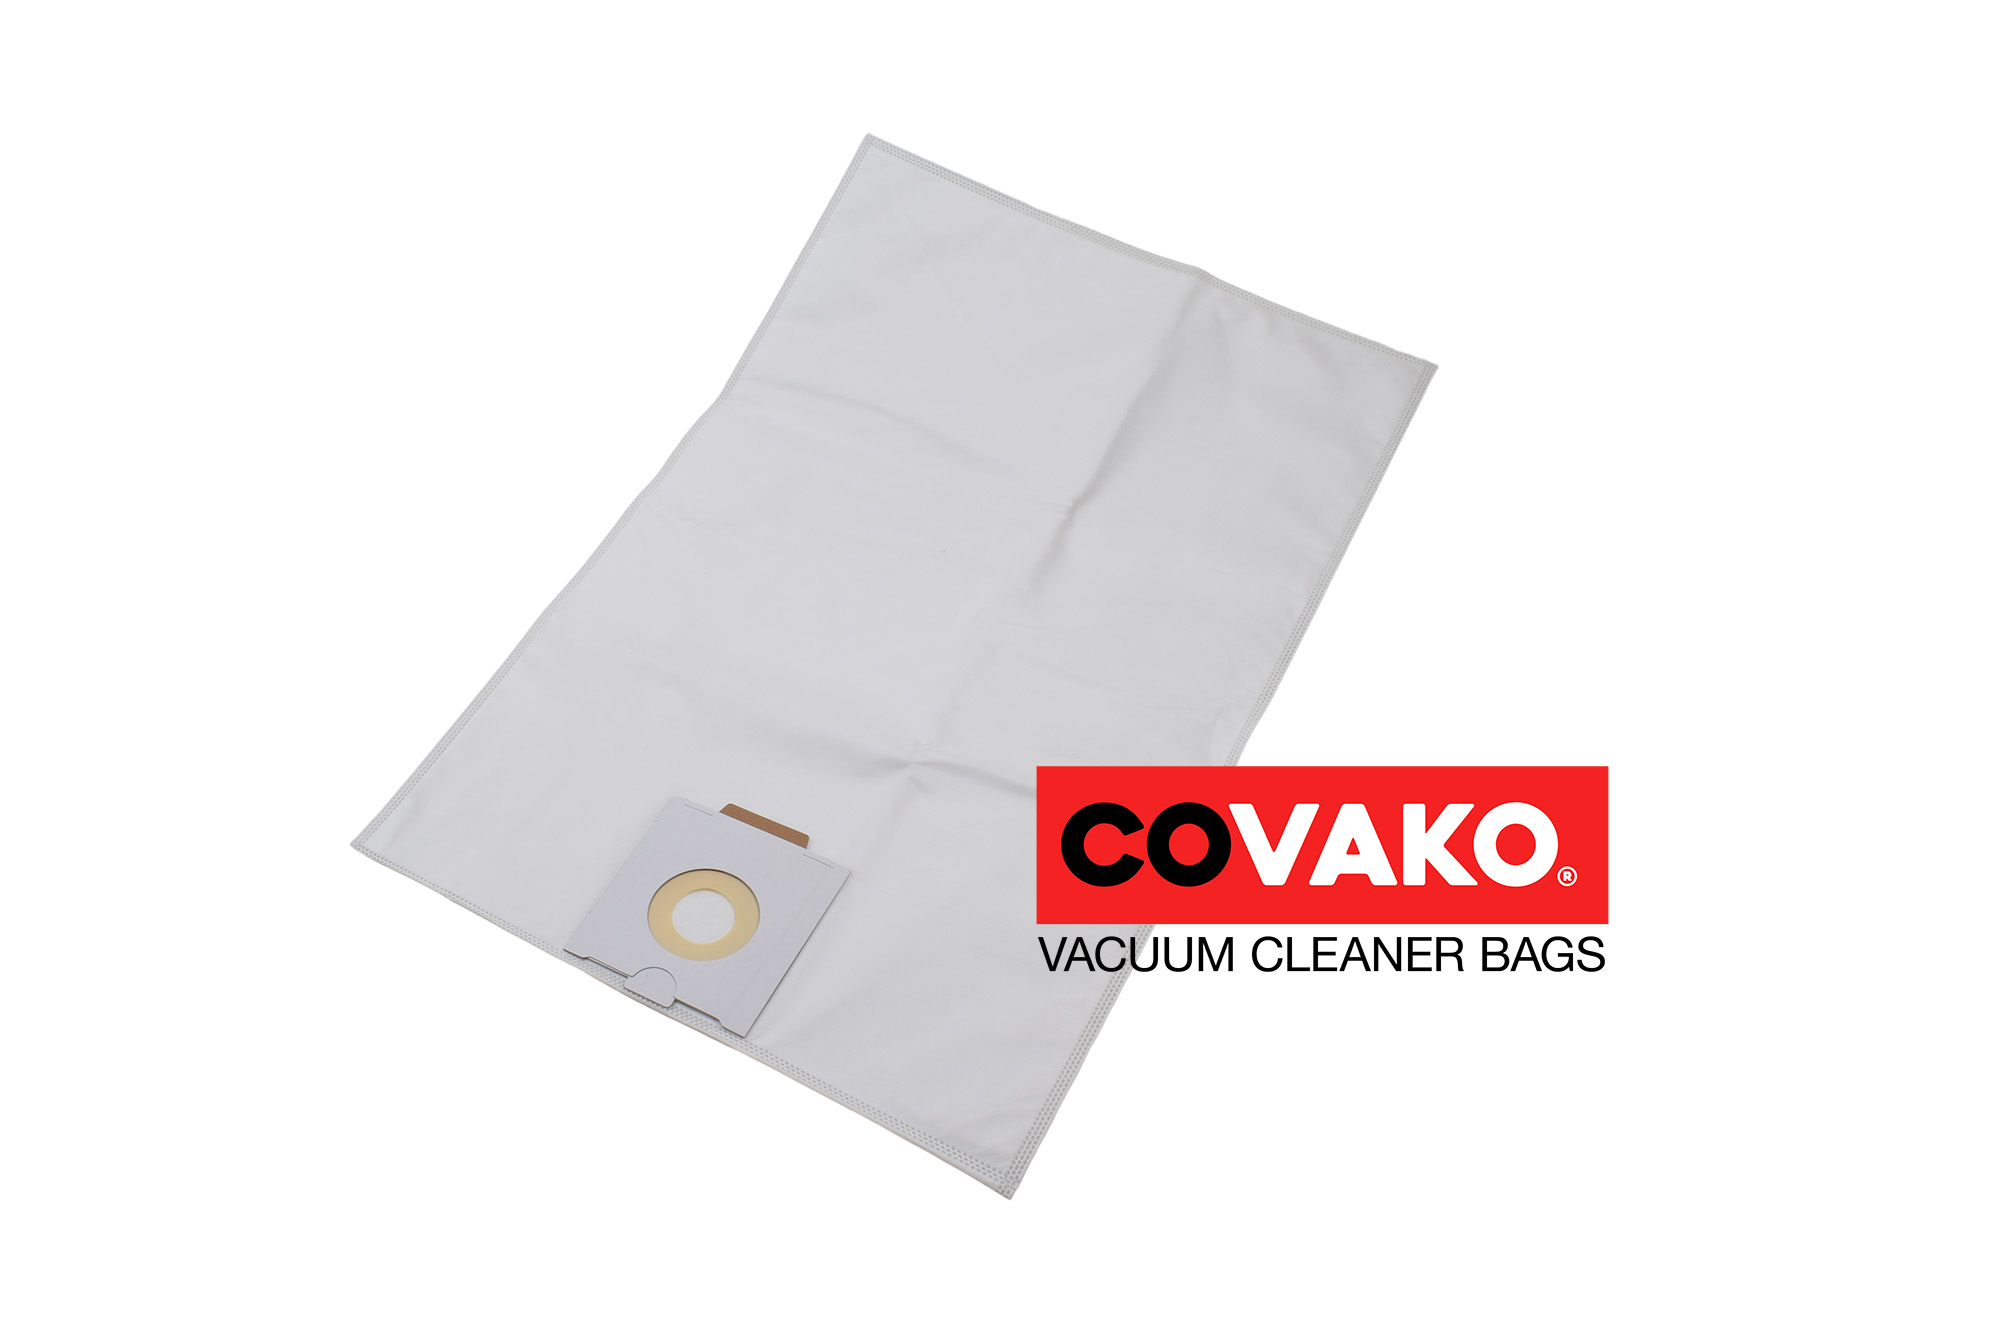 Protool VCP 260 E-H / Synthesis - Protool vacuum cleaner bags